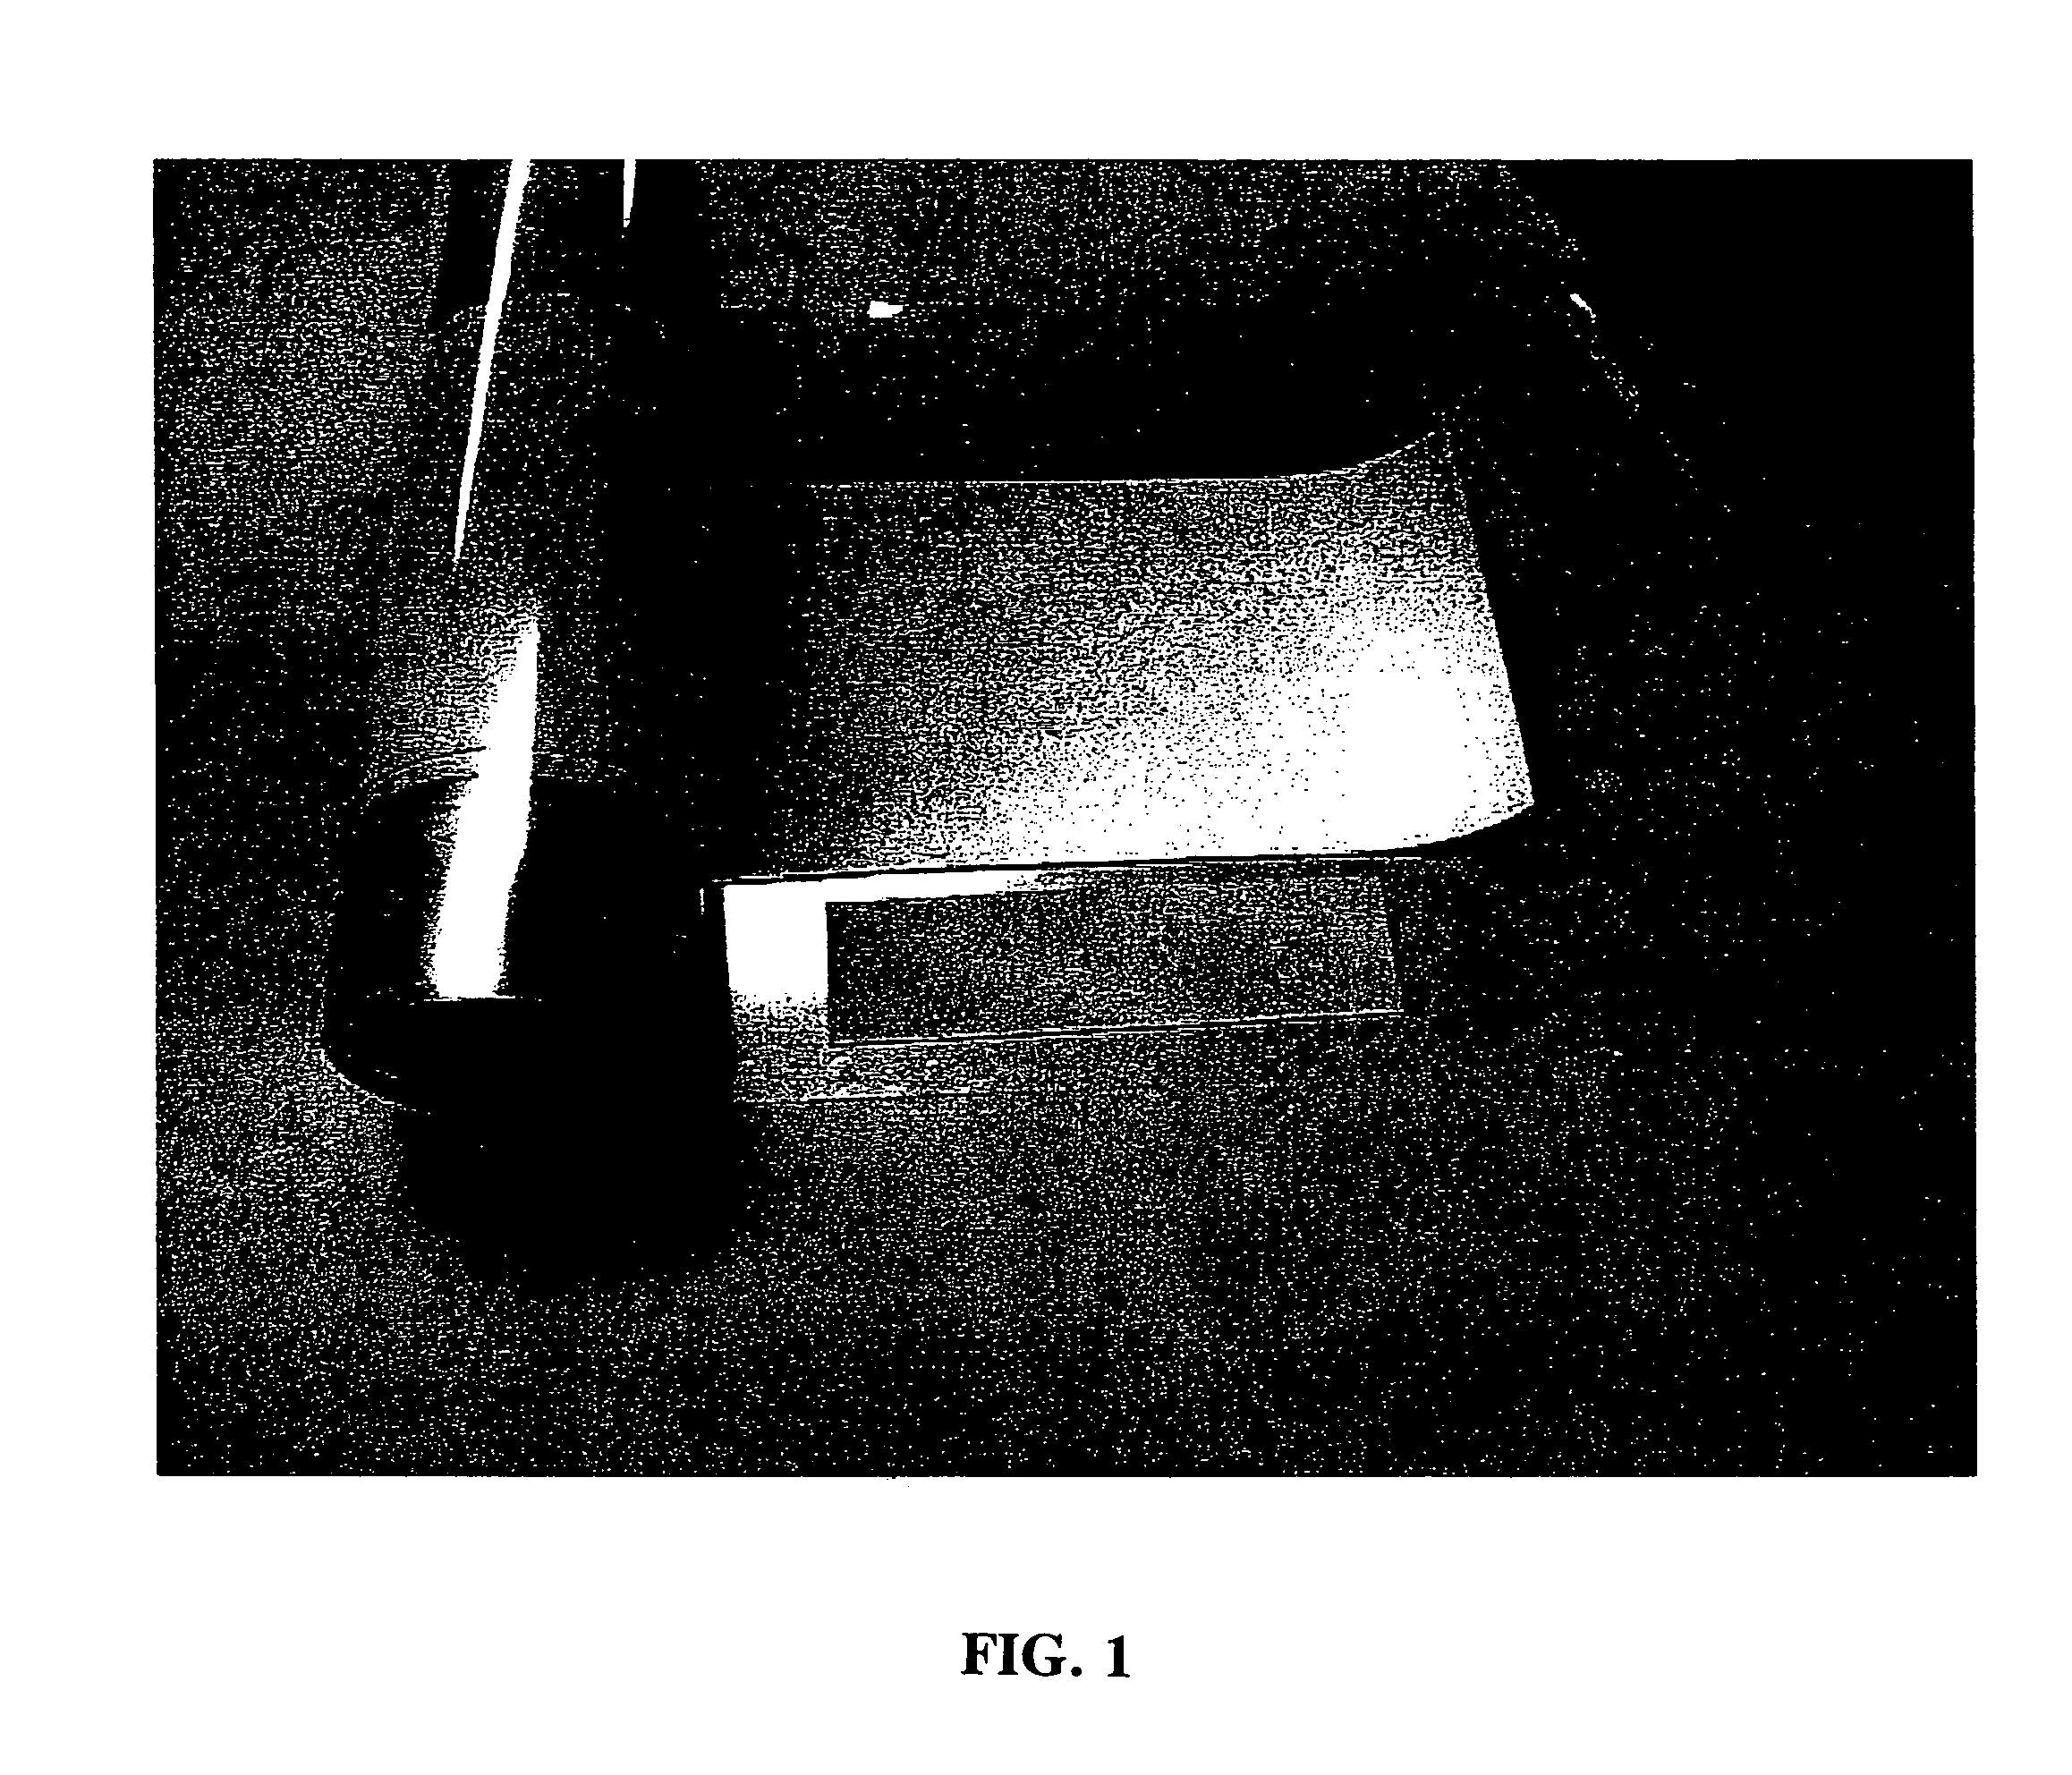 Method for producing low-loss tunable ceramic composites with improved breakdown strengths